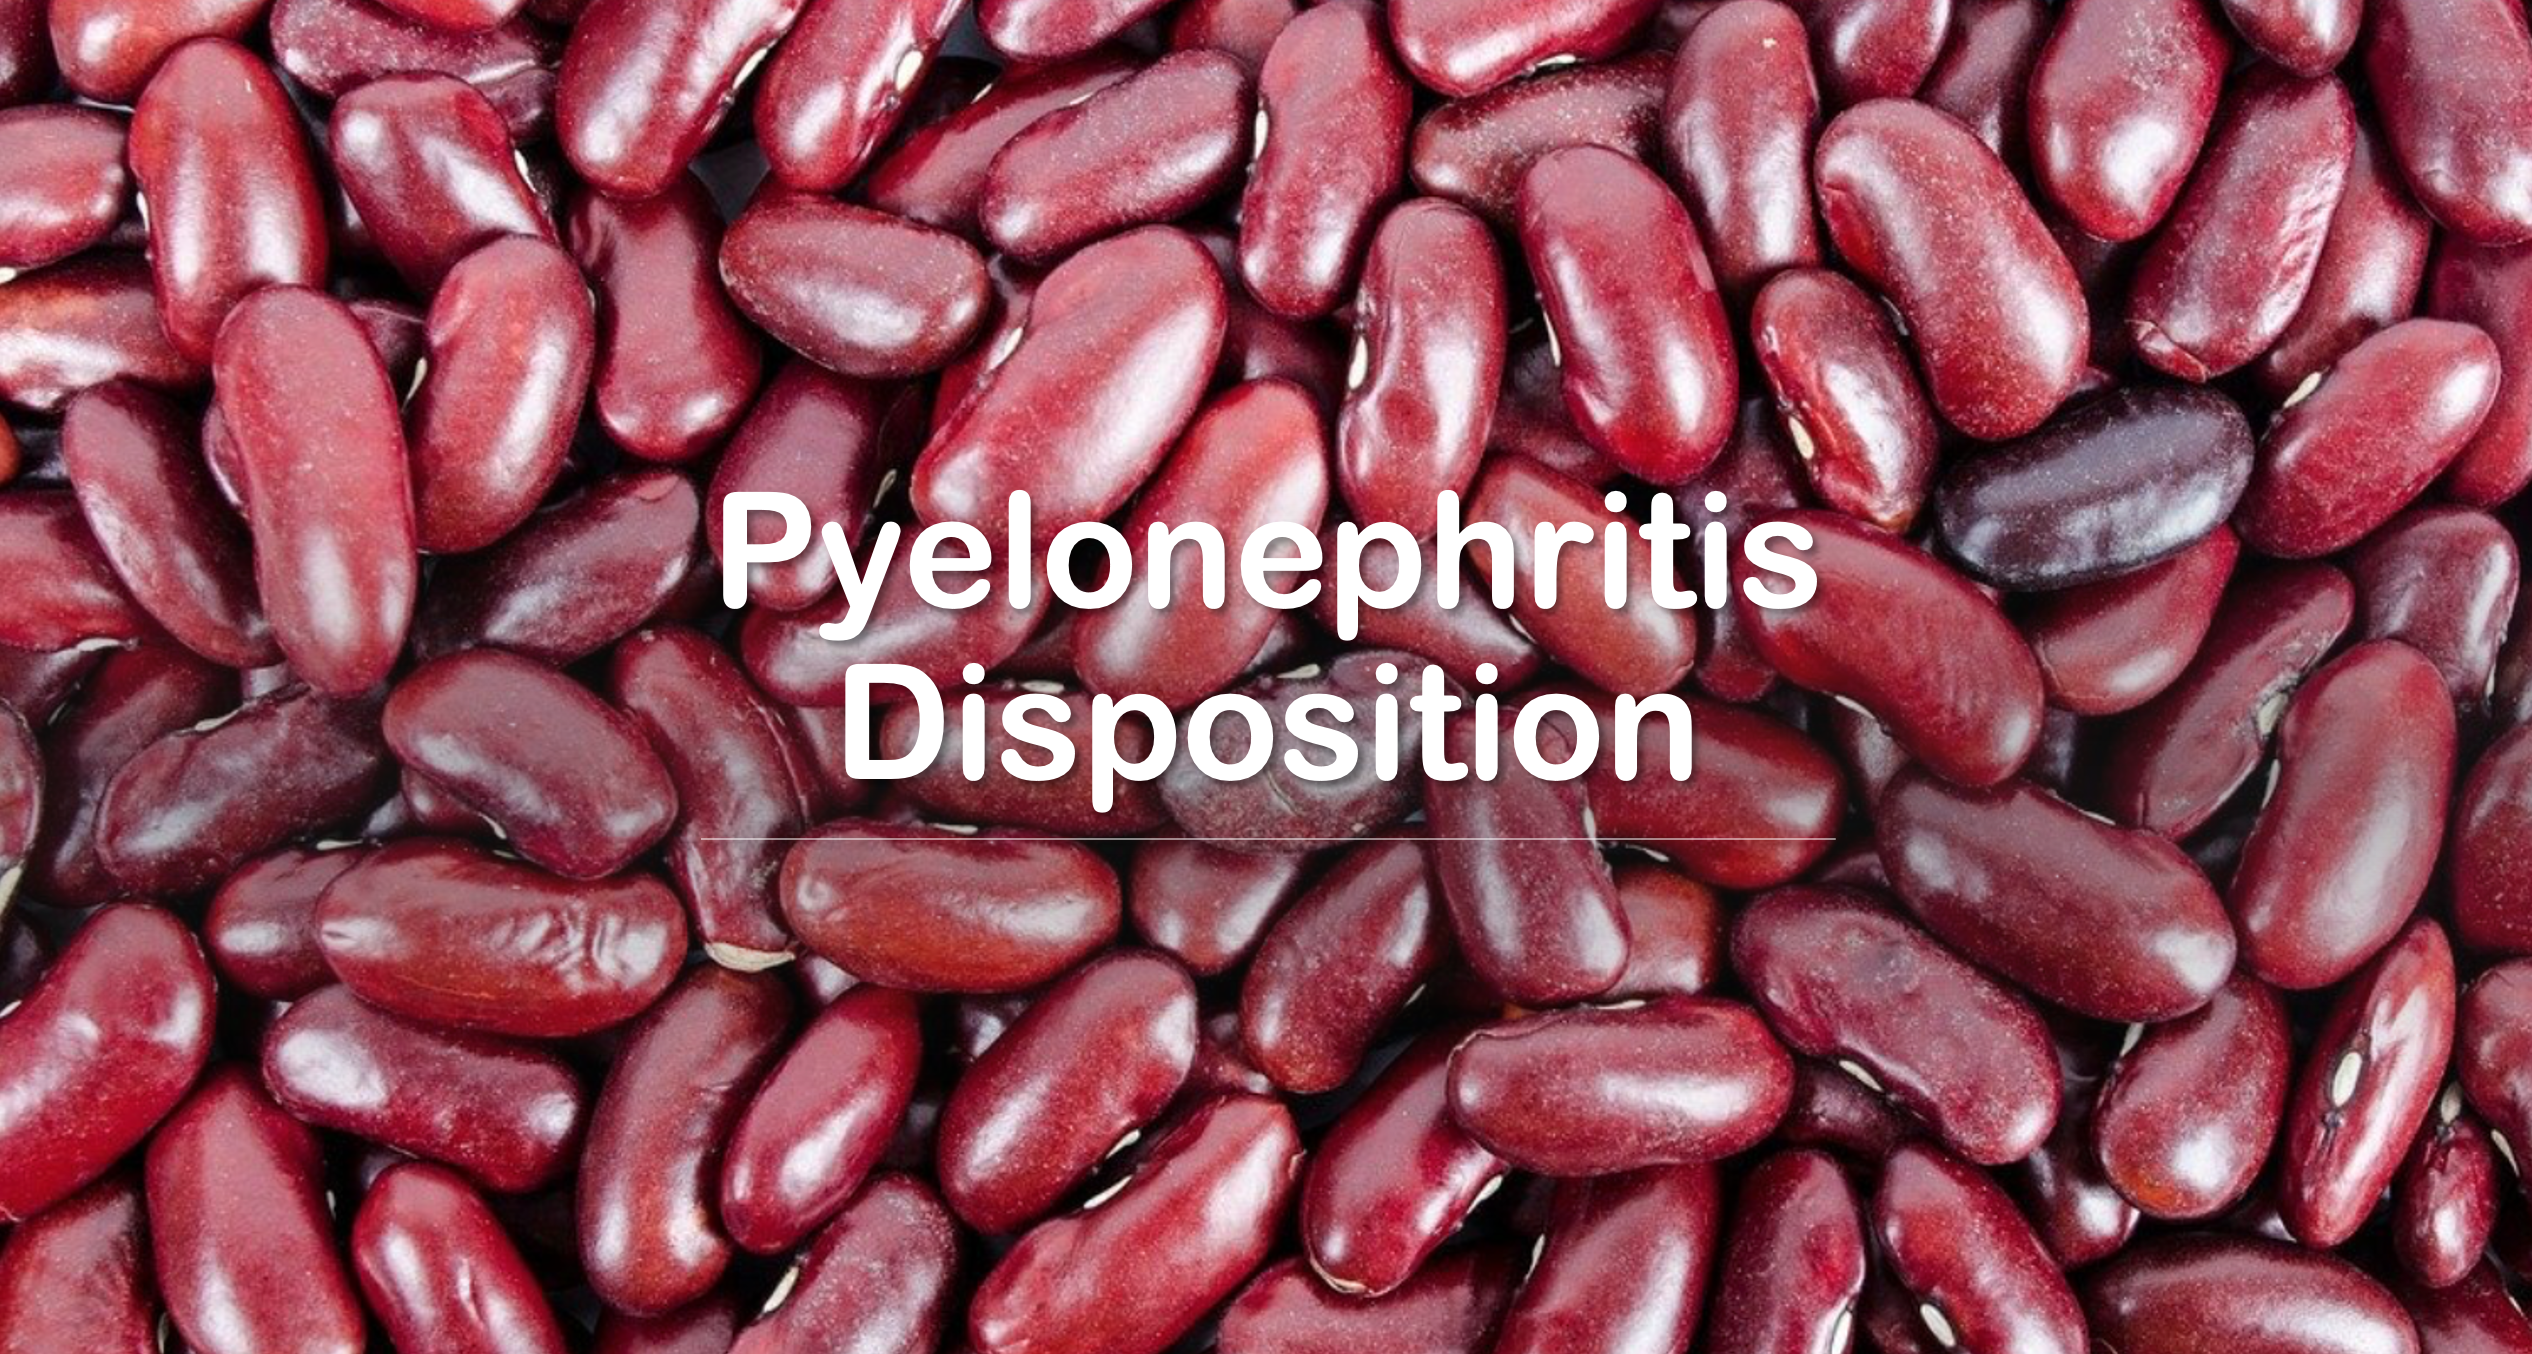 What if it’s not just cystitis? Disposition of pyelonephritis…